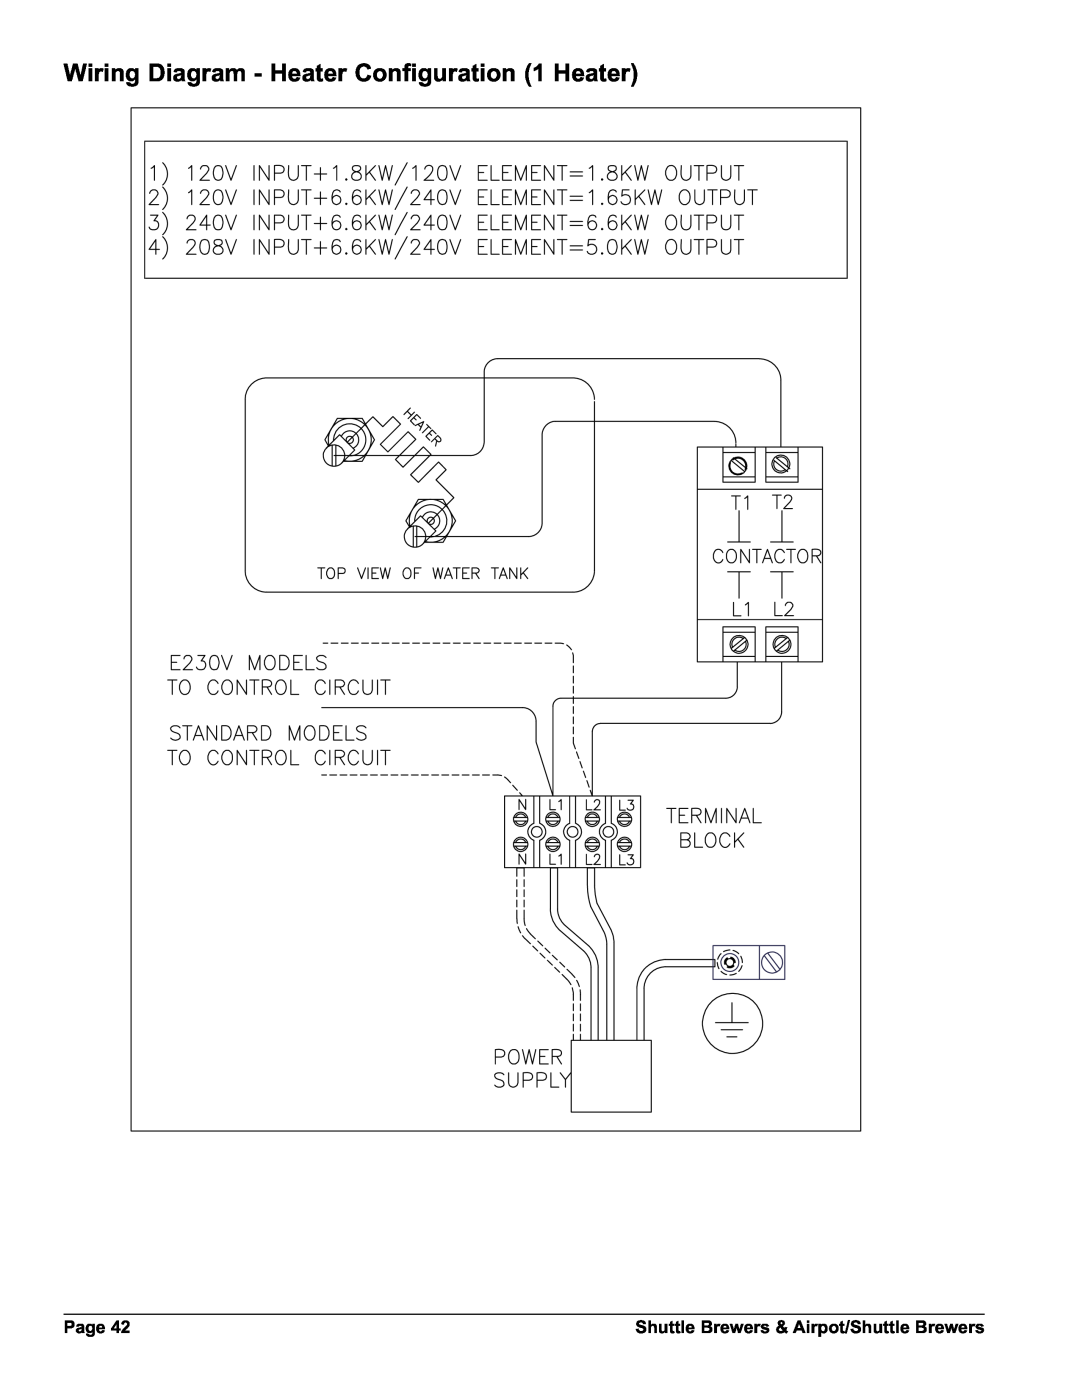 Grindmaster APB-330V2E230 Wiring Diagram - Heater Configuration 1 Heater, Page, Shuttle Brewers & Airpot/Shuttle Brewers 